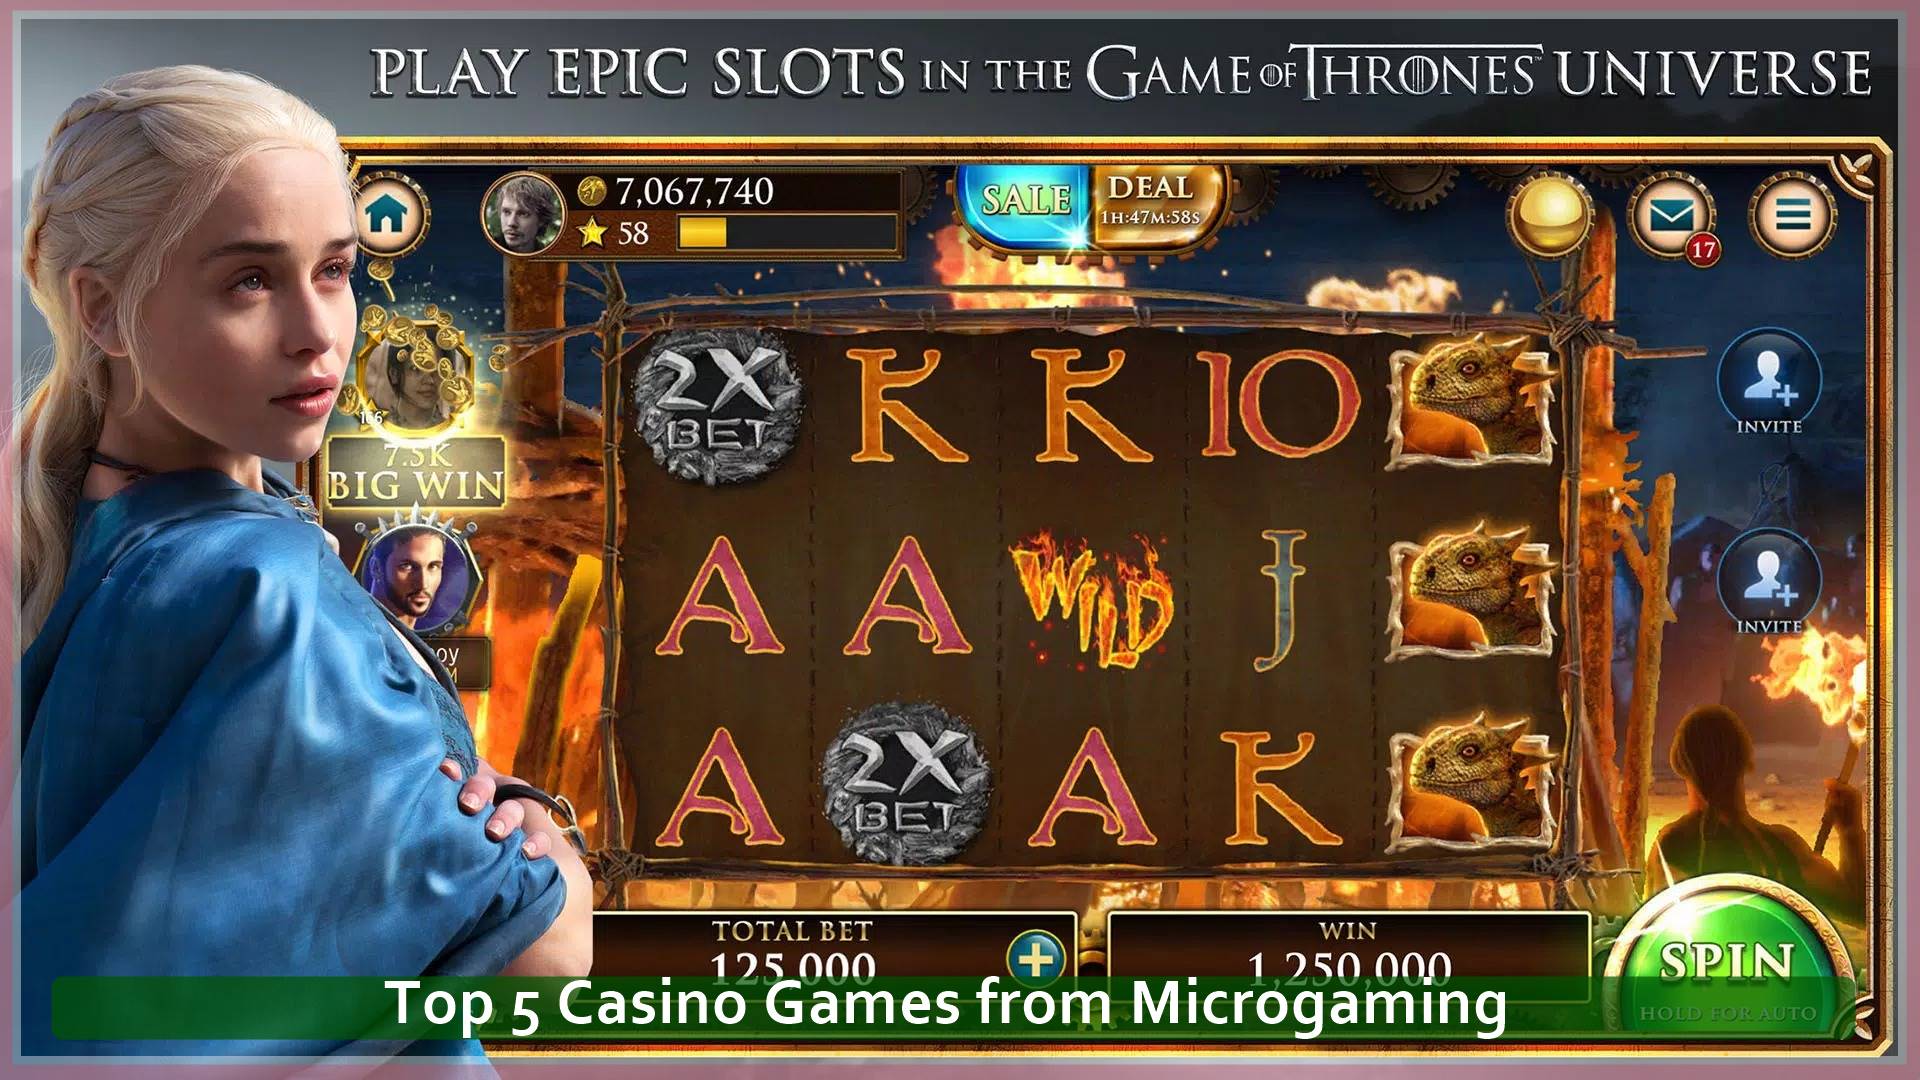 Top 5 Casino Games from Microgaming